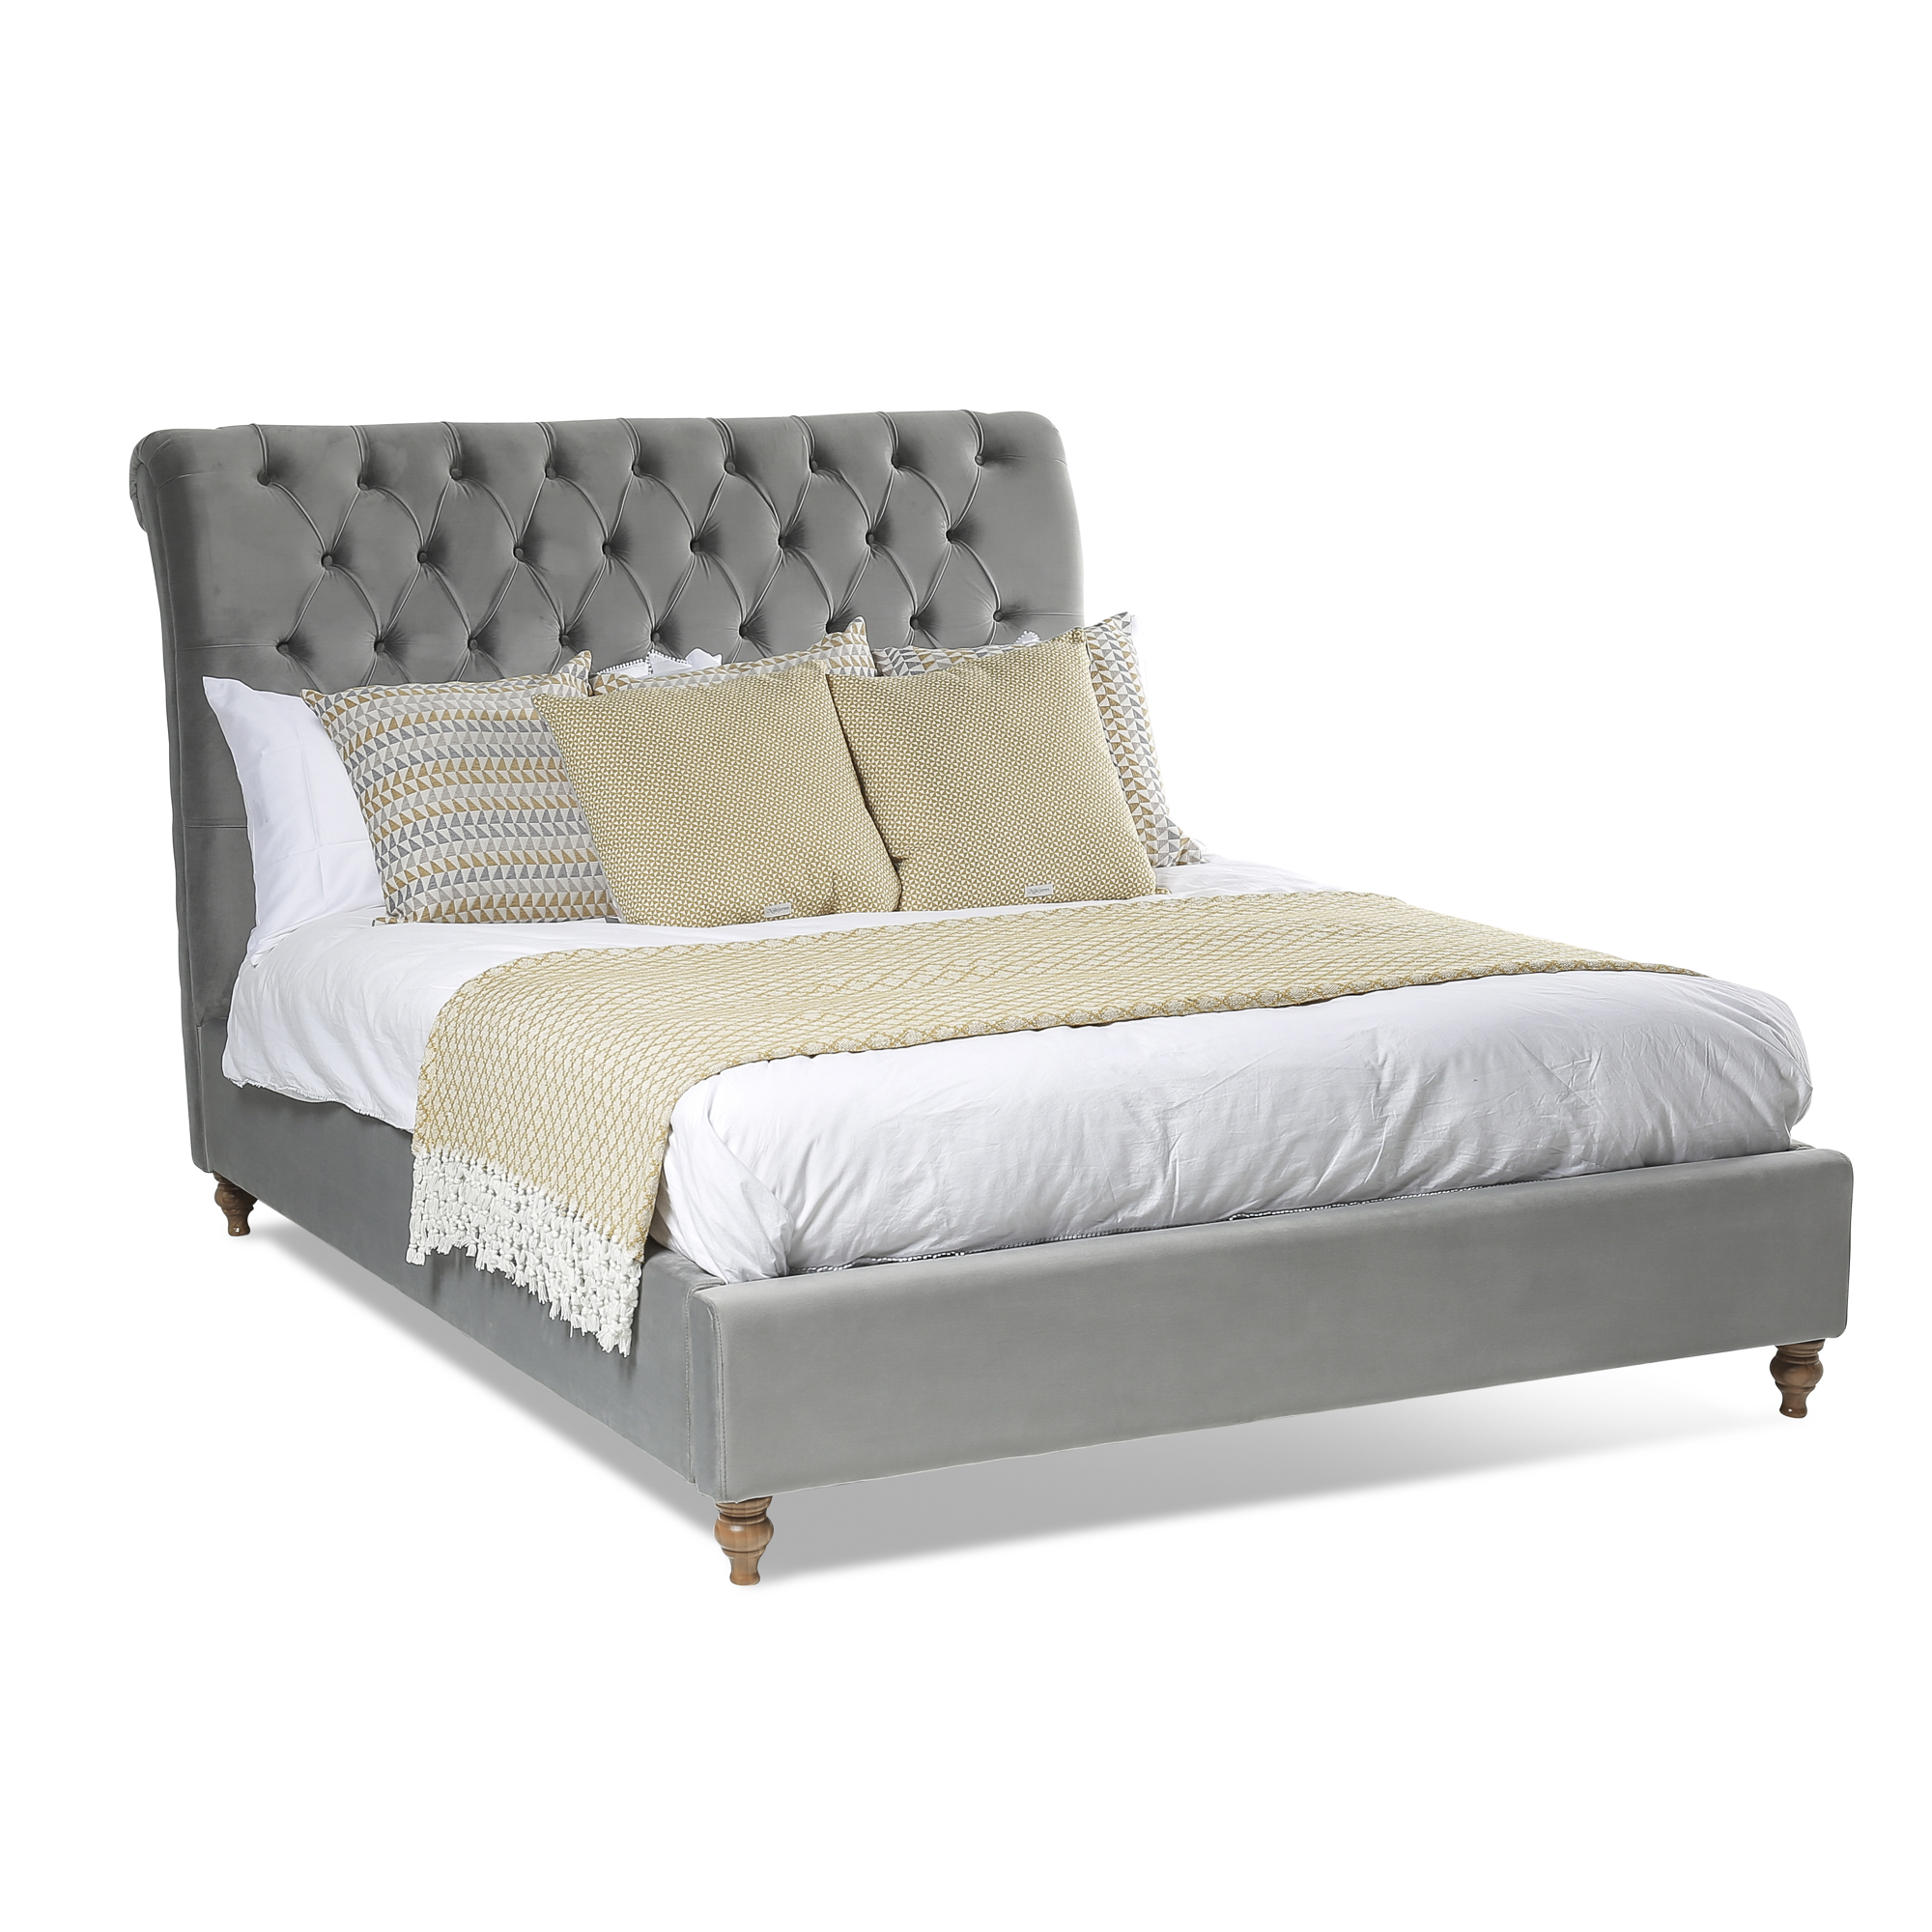 5ft Chesterfield King Size Bed With Grey Velvet Upholstery